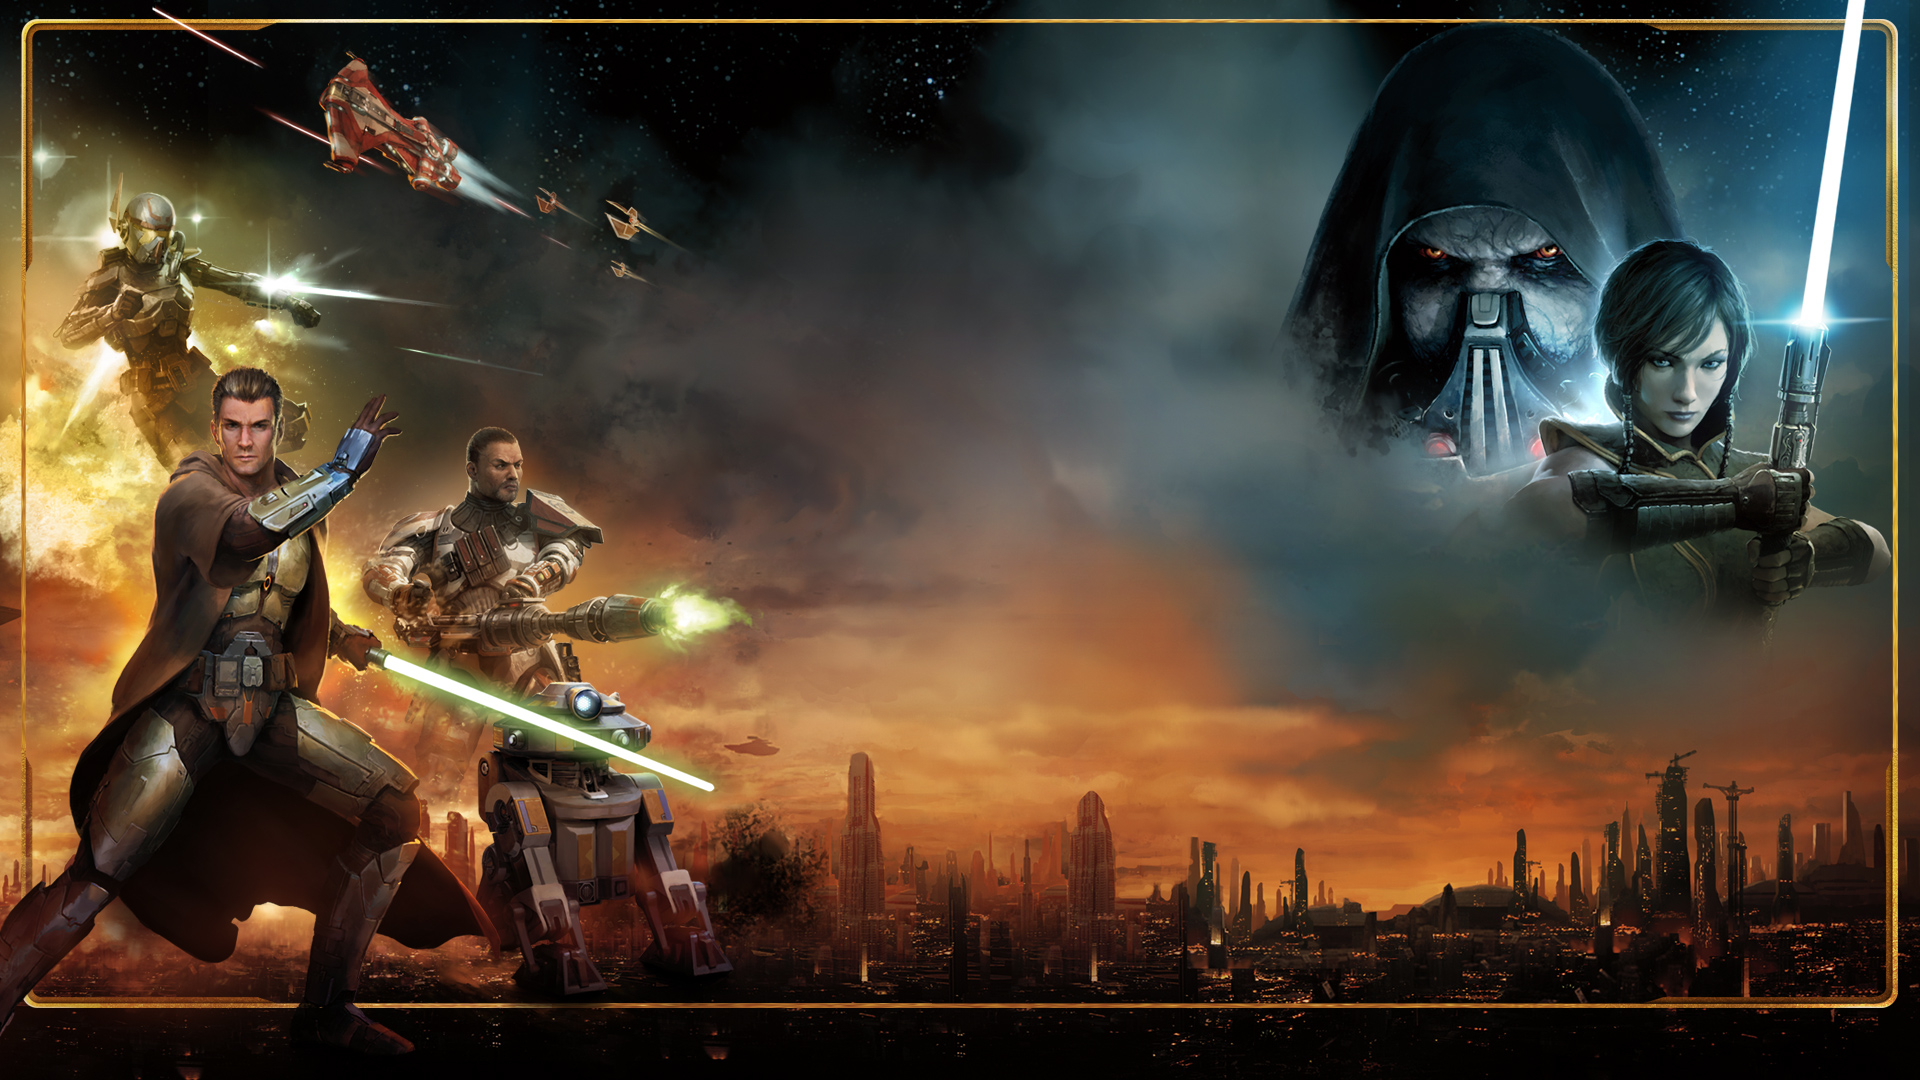 star wars wallpaper 1920x1080,action adventure game,pc game,strategy video game,games,cg artwork